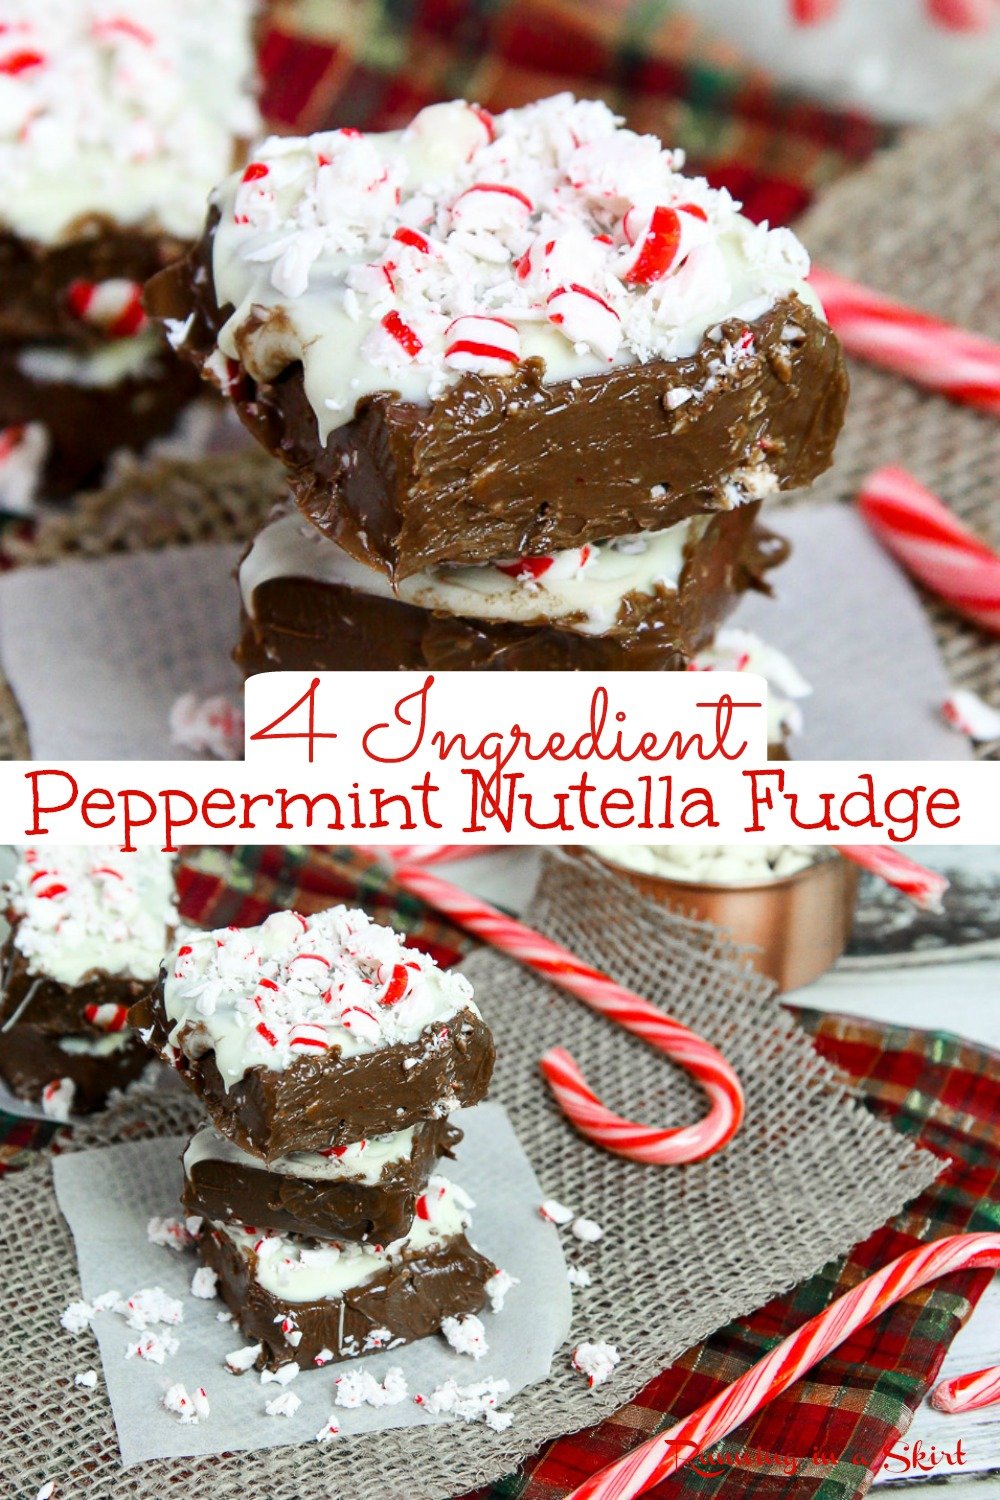 Peppermint No Bake Nutella Fudge recipe - Only 4 Ingredients! An easy No Bake Peppermint Fudge with nutella, candy cane and a white chocolate layer topping. Includes how to make instructions for No Bake Fudge. Healthy swap - made with coconut oil and without condensed milk. The best holiday freezer fudge! Vegetarian, Gluten Free/ Runing in a Skirt #Christmas #fudge #peppermint #healthyliving #recipe via @juliewunder